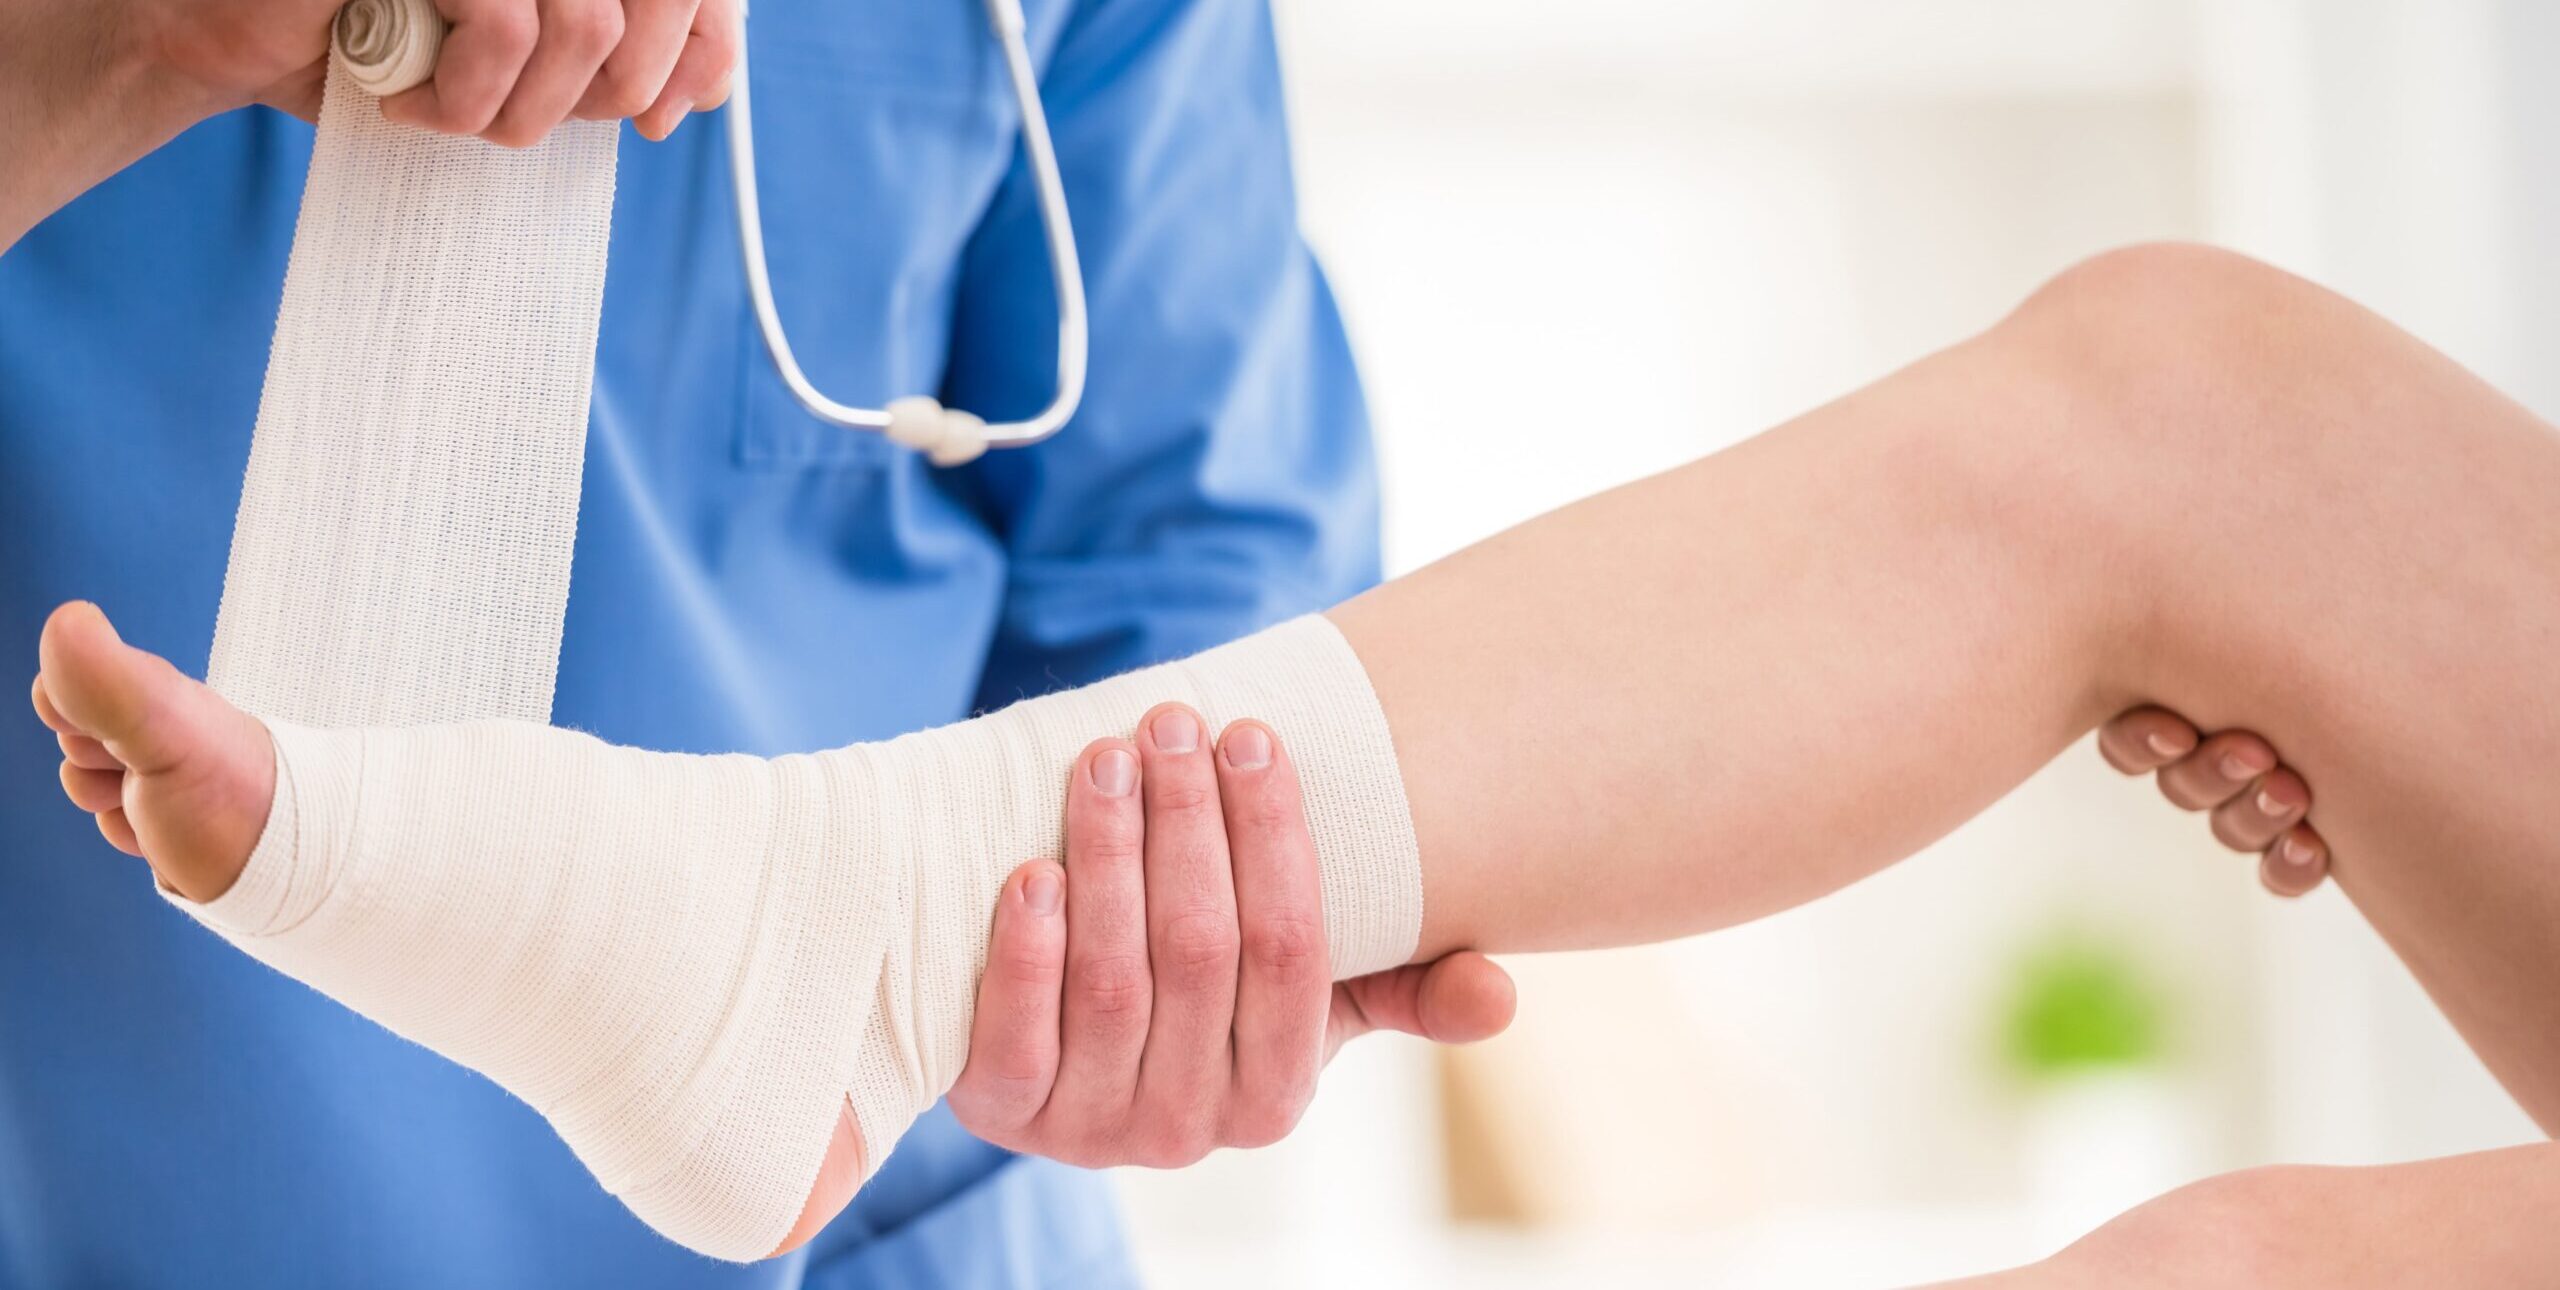 The Assessment and Management of Minor Injuries